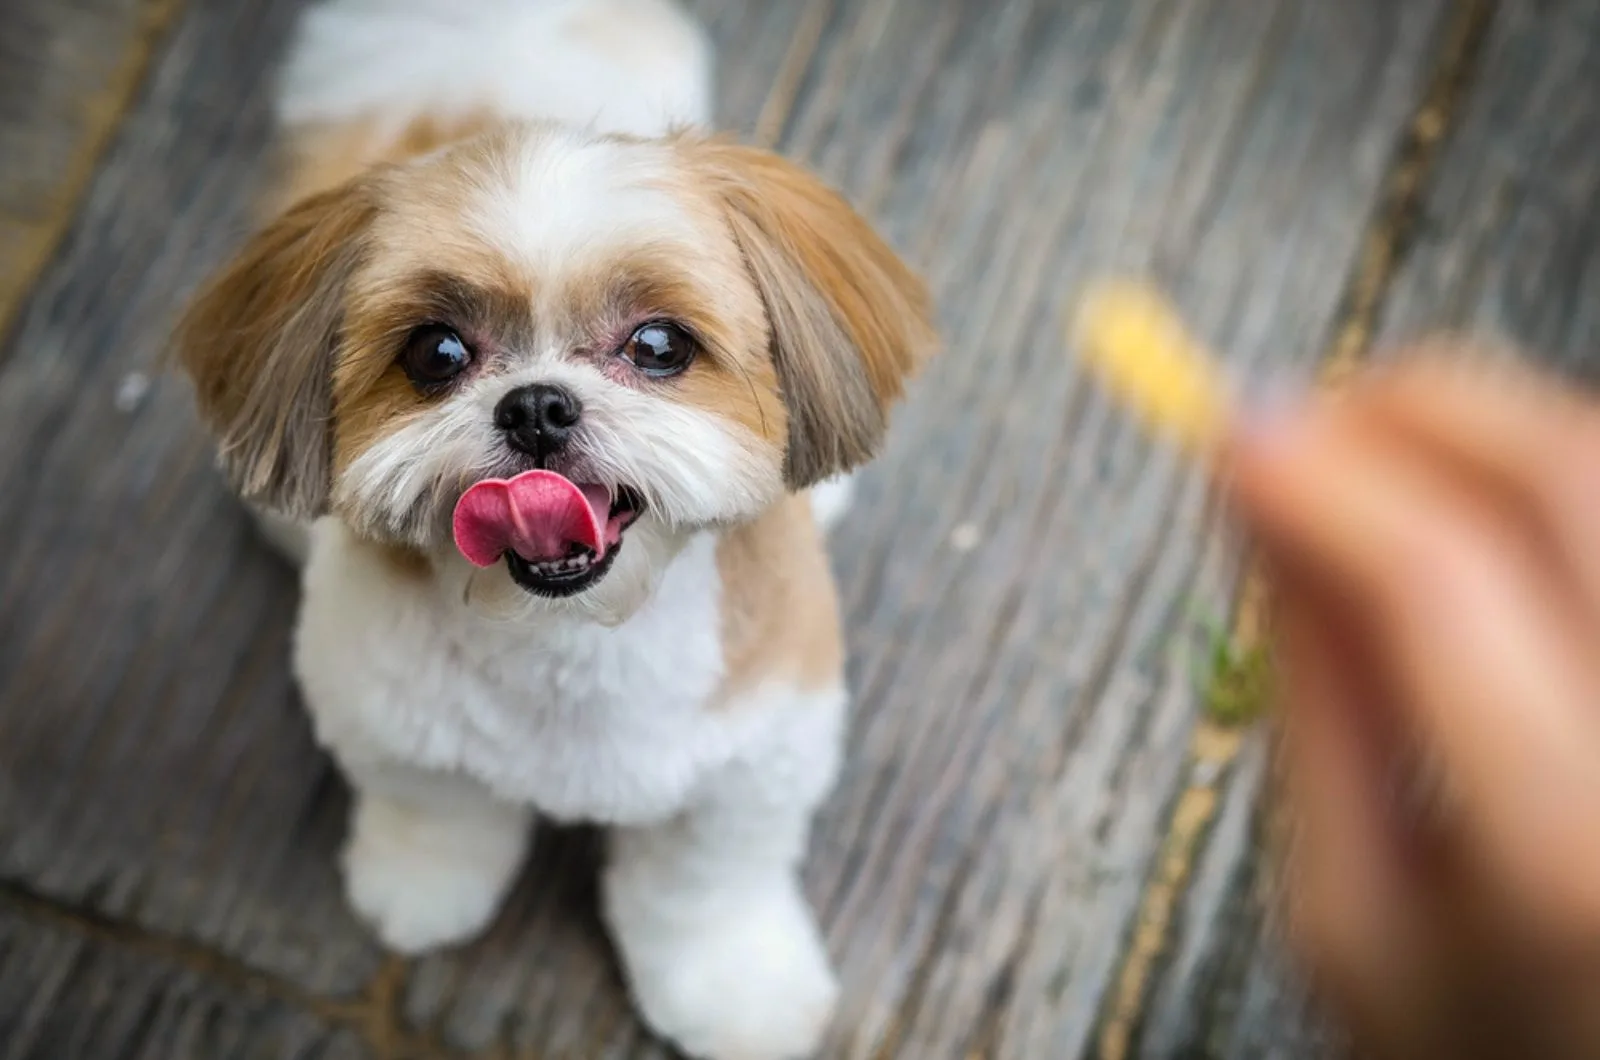 shih tzu dog is looking a snack in owner's hand